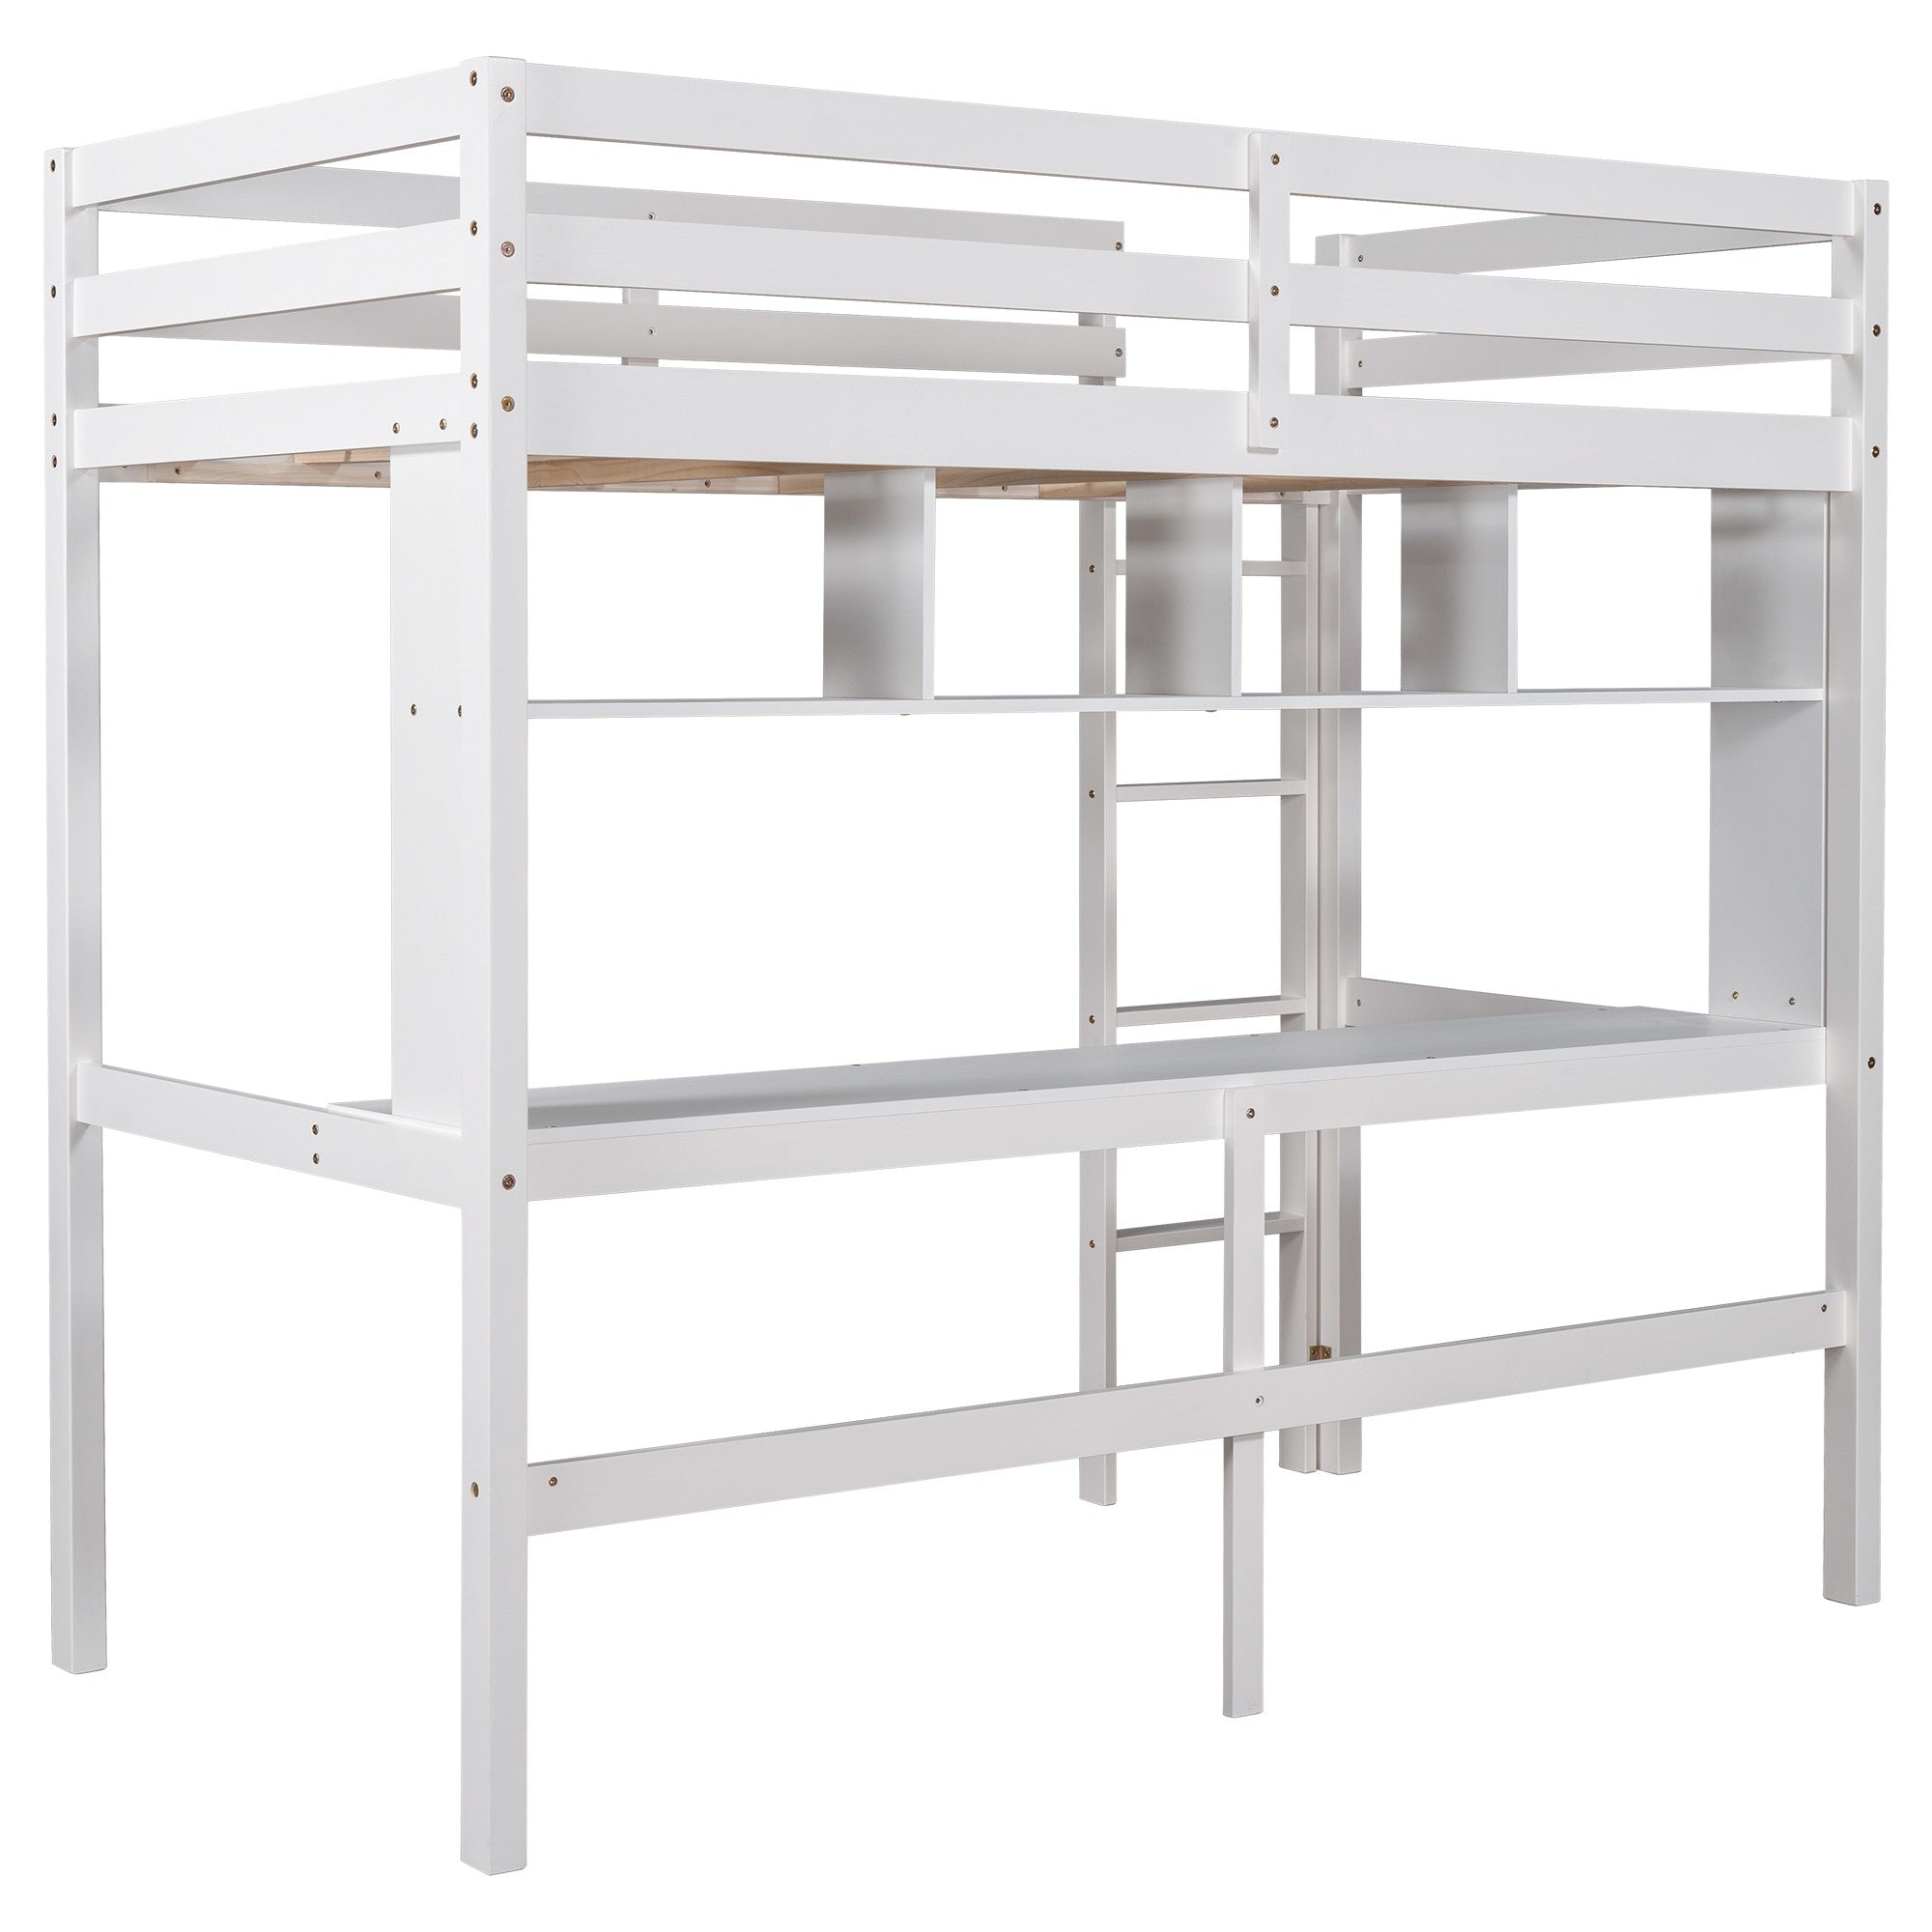 Minimalist White Twin Size Loft Bed with Built In Desk and Shelf